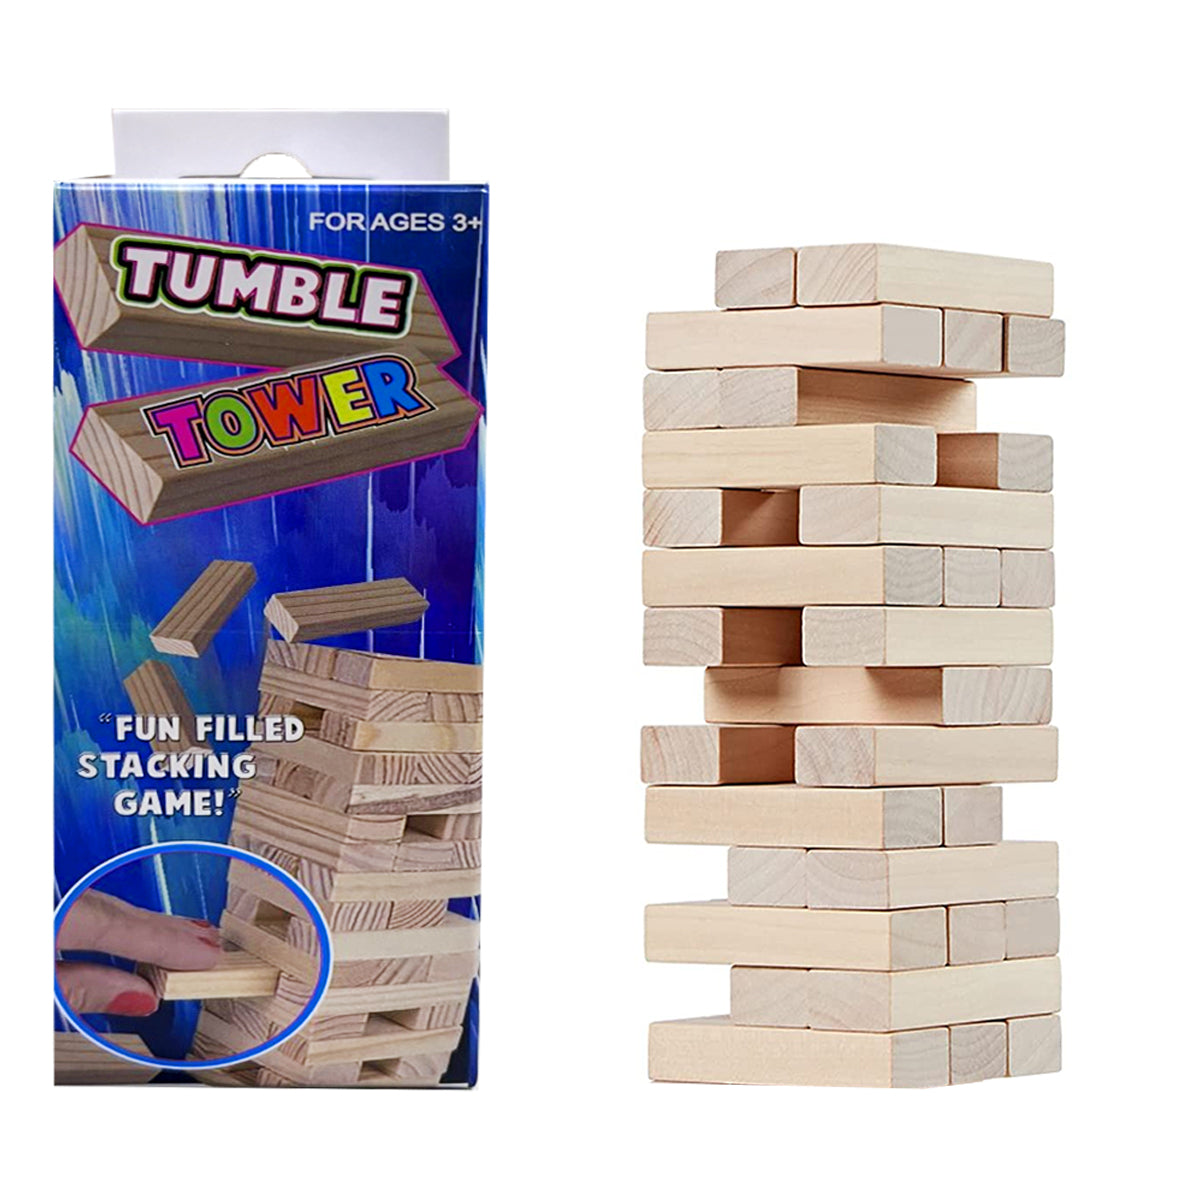 Tumble Tower Mini Wooden Stacking Game – Fun For Kids & Adults!